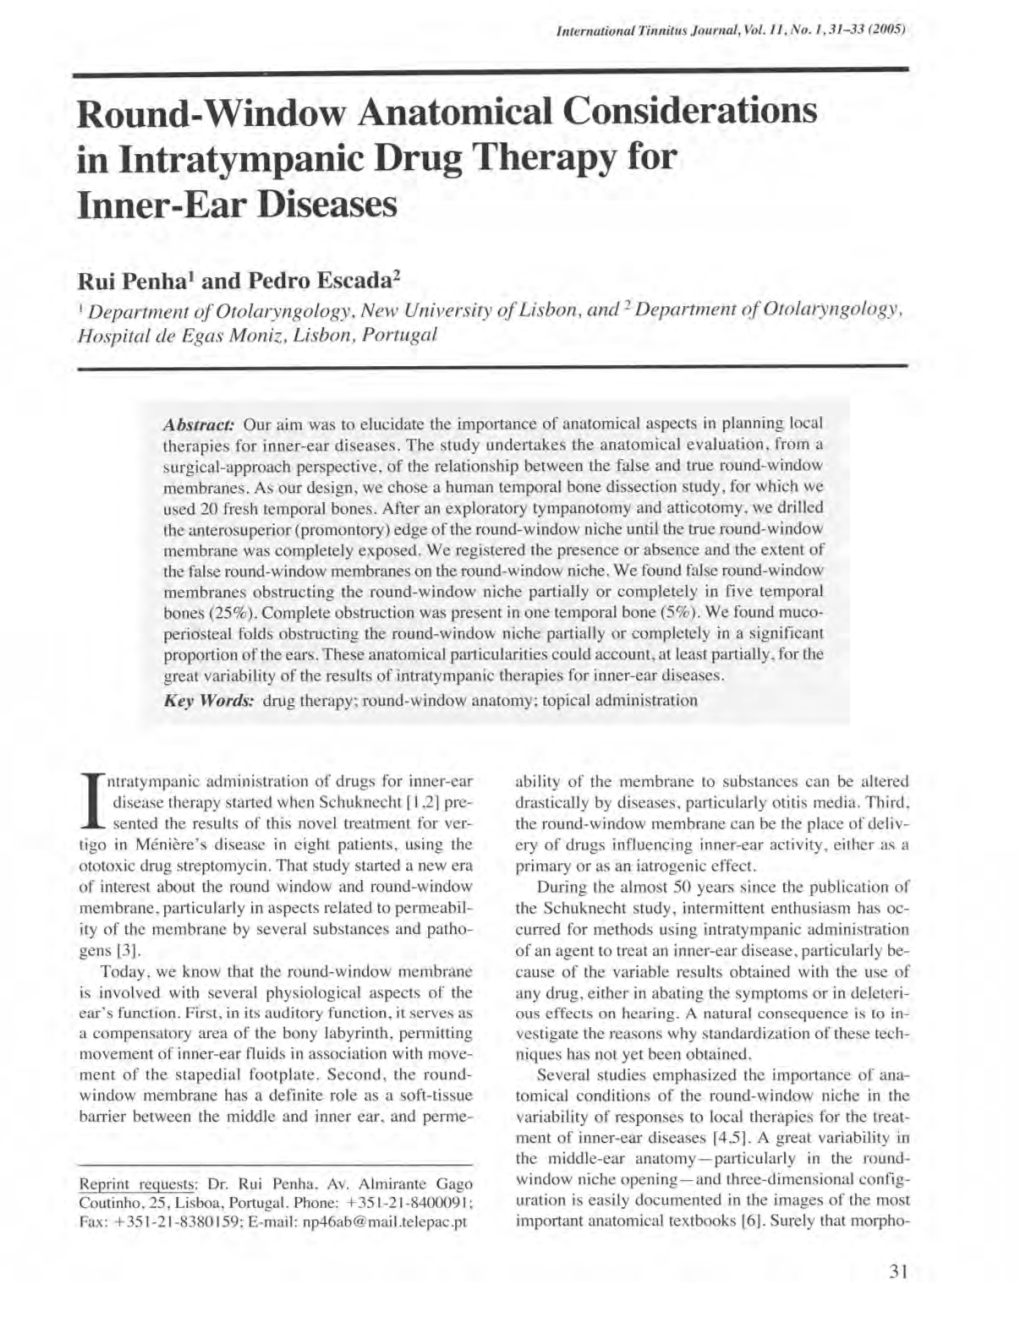 Round-Window Anatomical Considerations in Intratympanic Drug Therapy for Inner-Ear Diseases